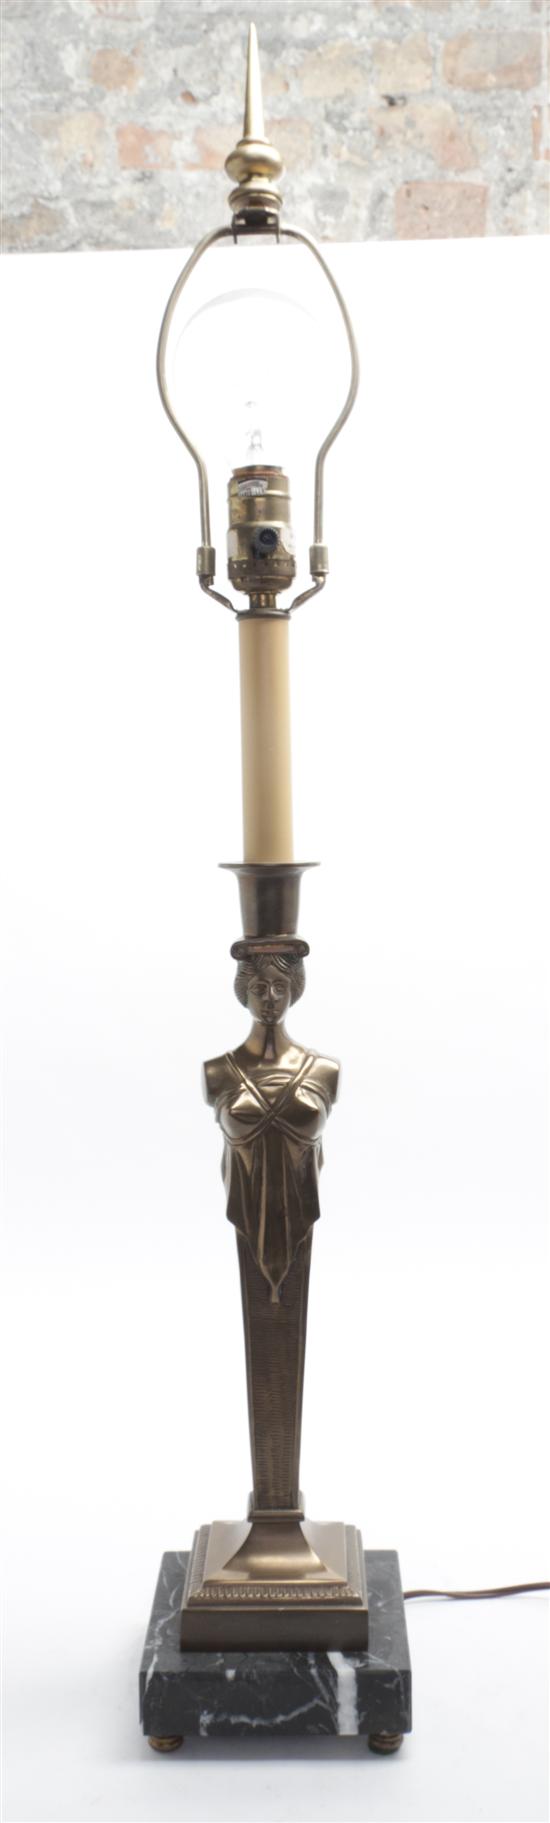 A Neoclassical Brass Table Lamp cast